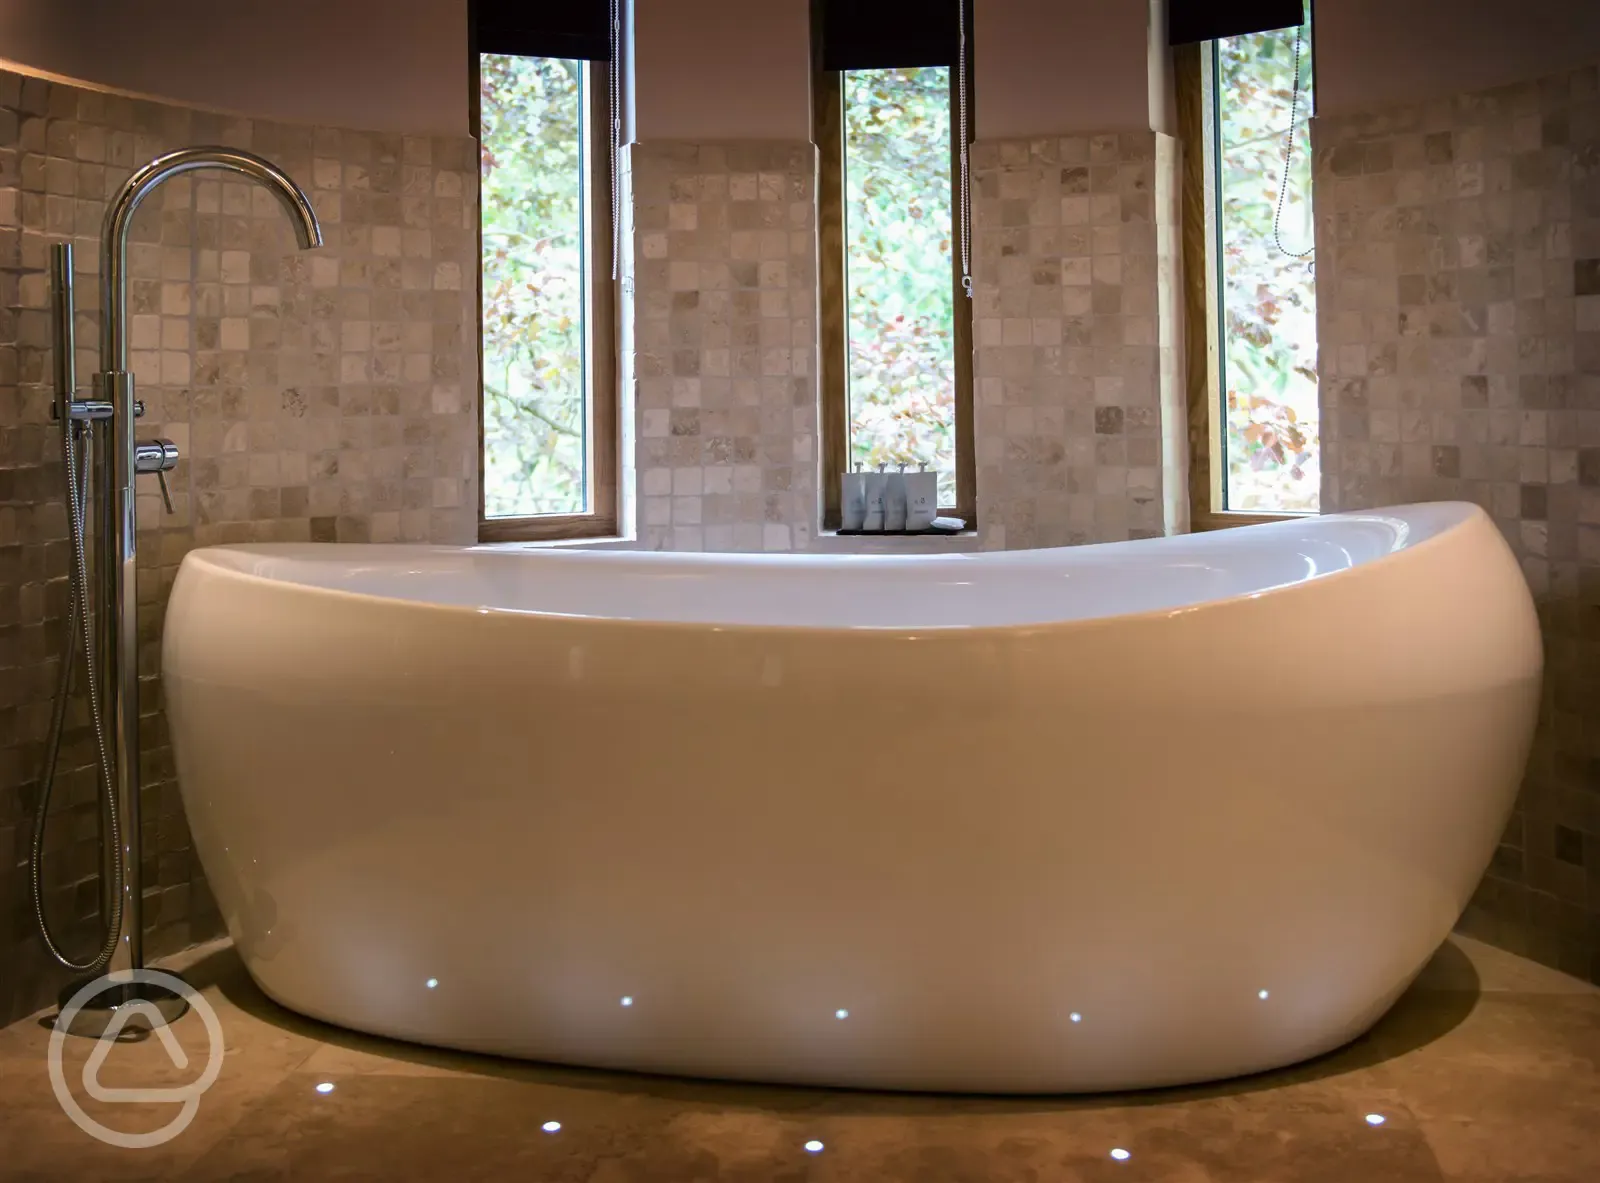 Stand alone deep fill bathtub surrounded by floor moodlighting.